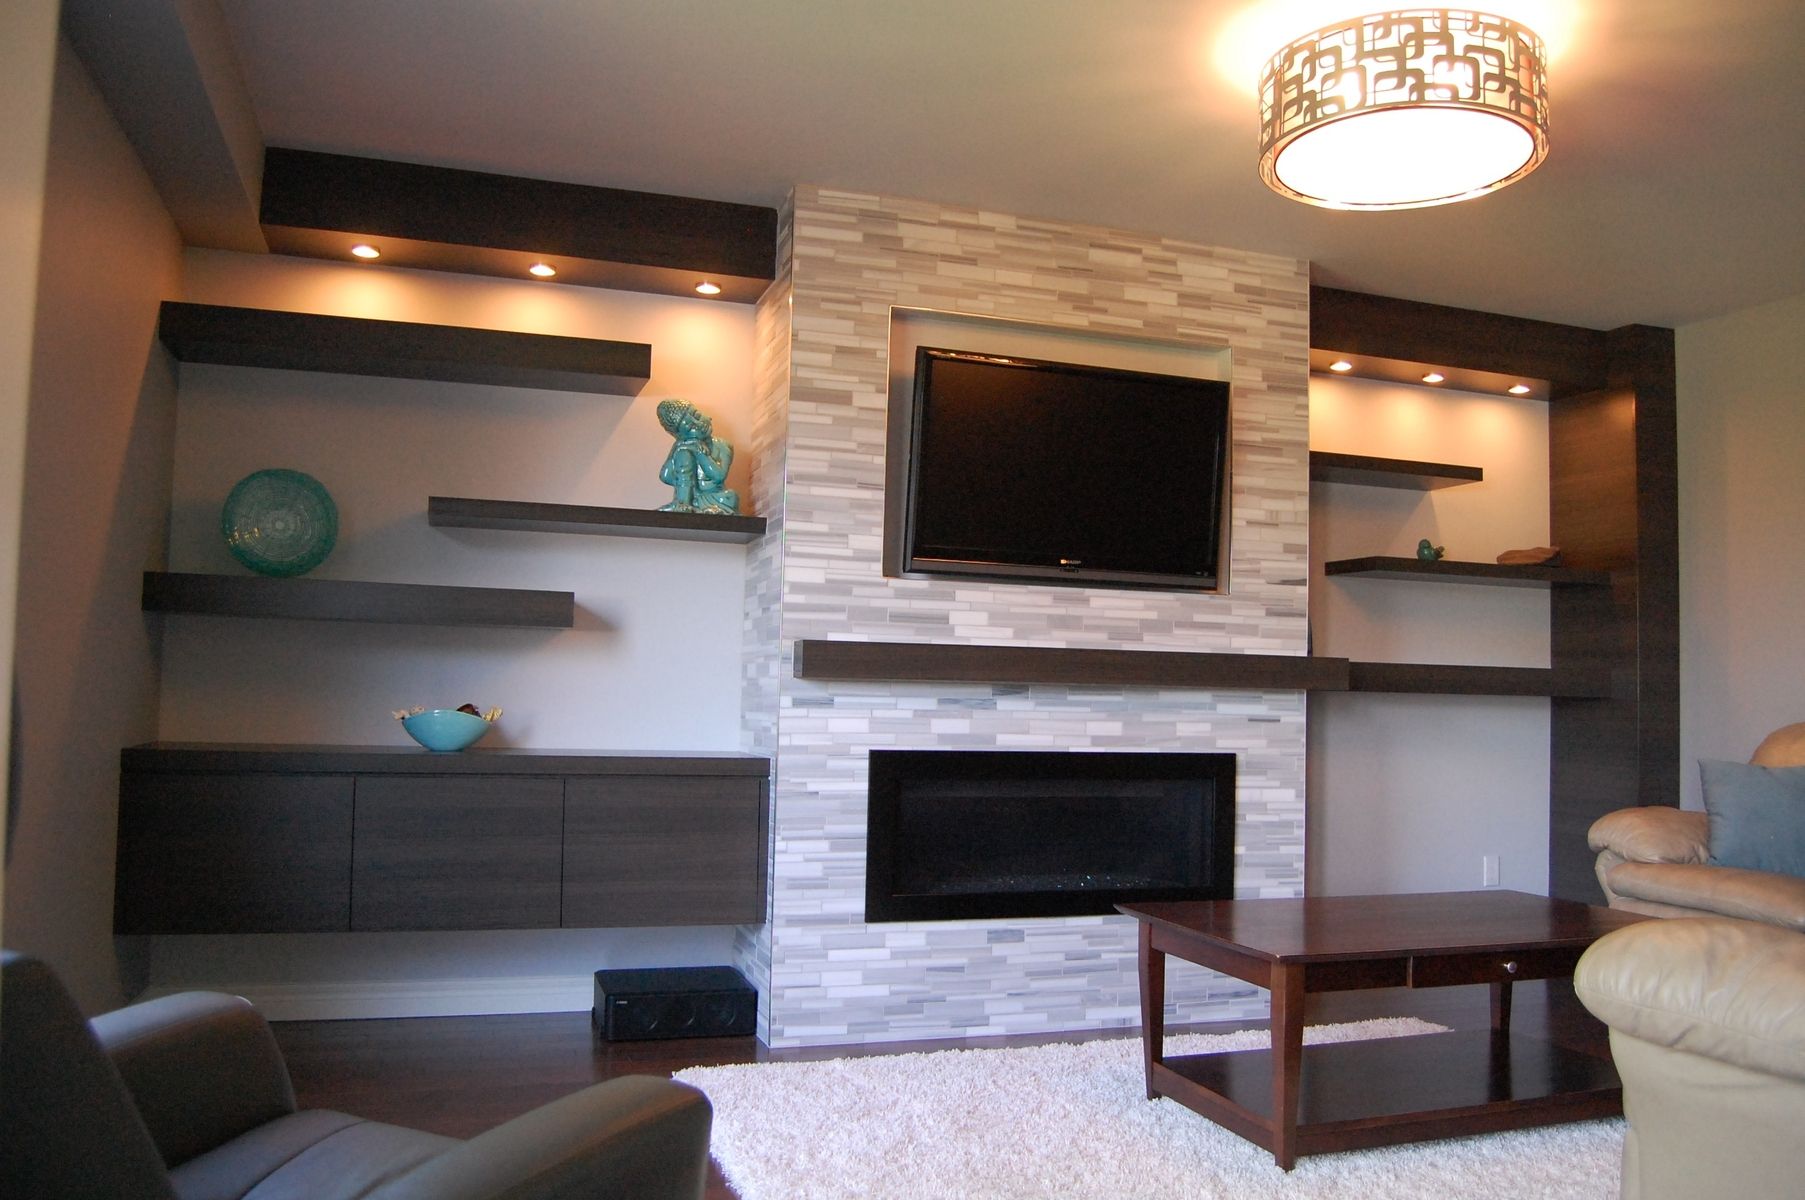 Floating Shelves by Fireplace Beautiful Custom Modern Wall Unit Made Pletely From A Printed